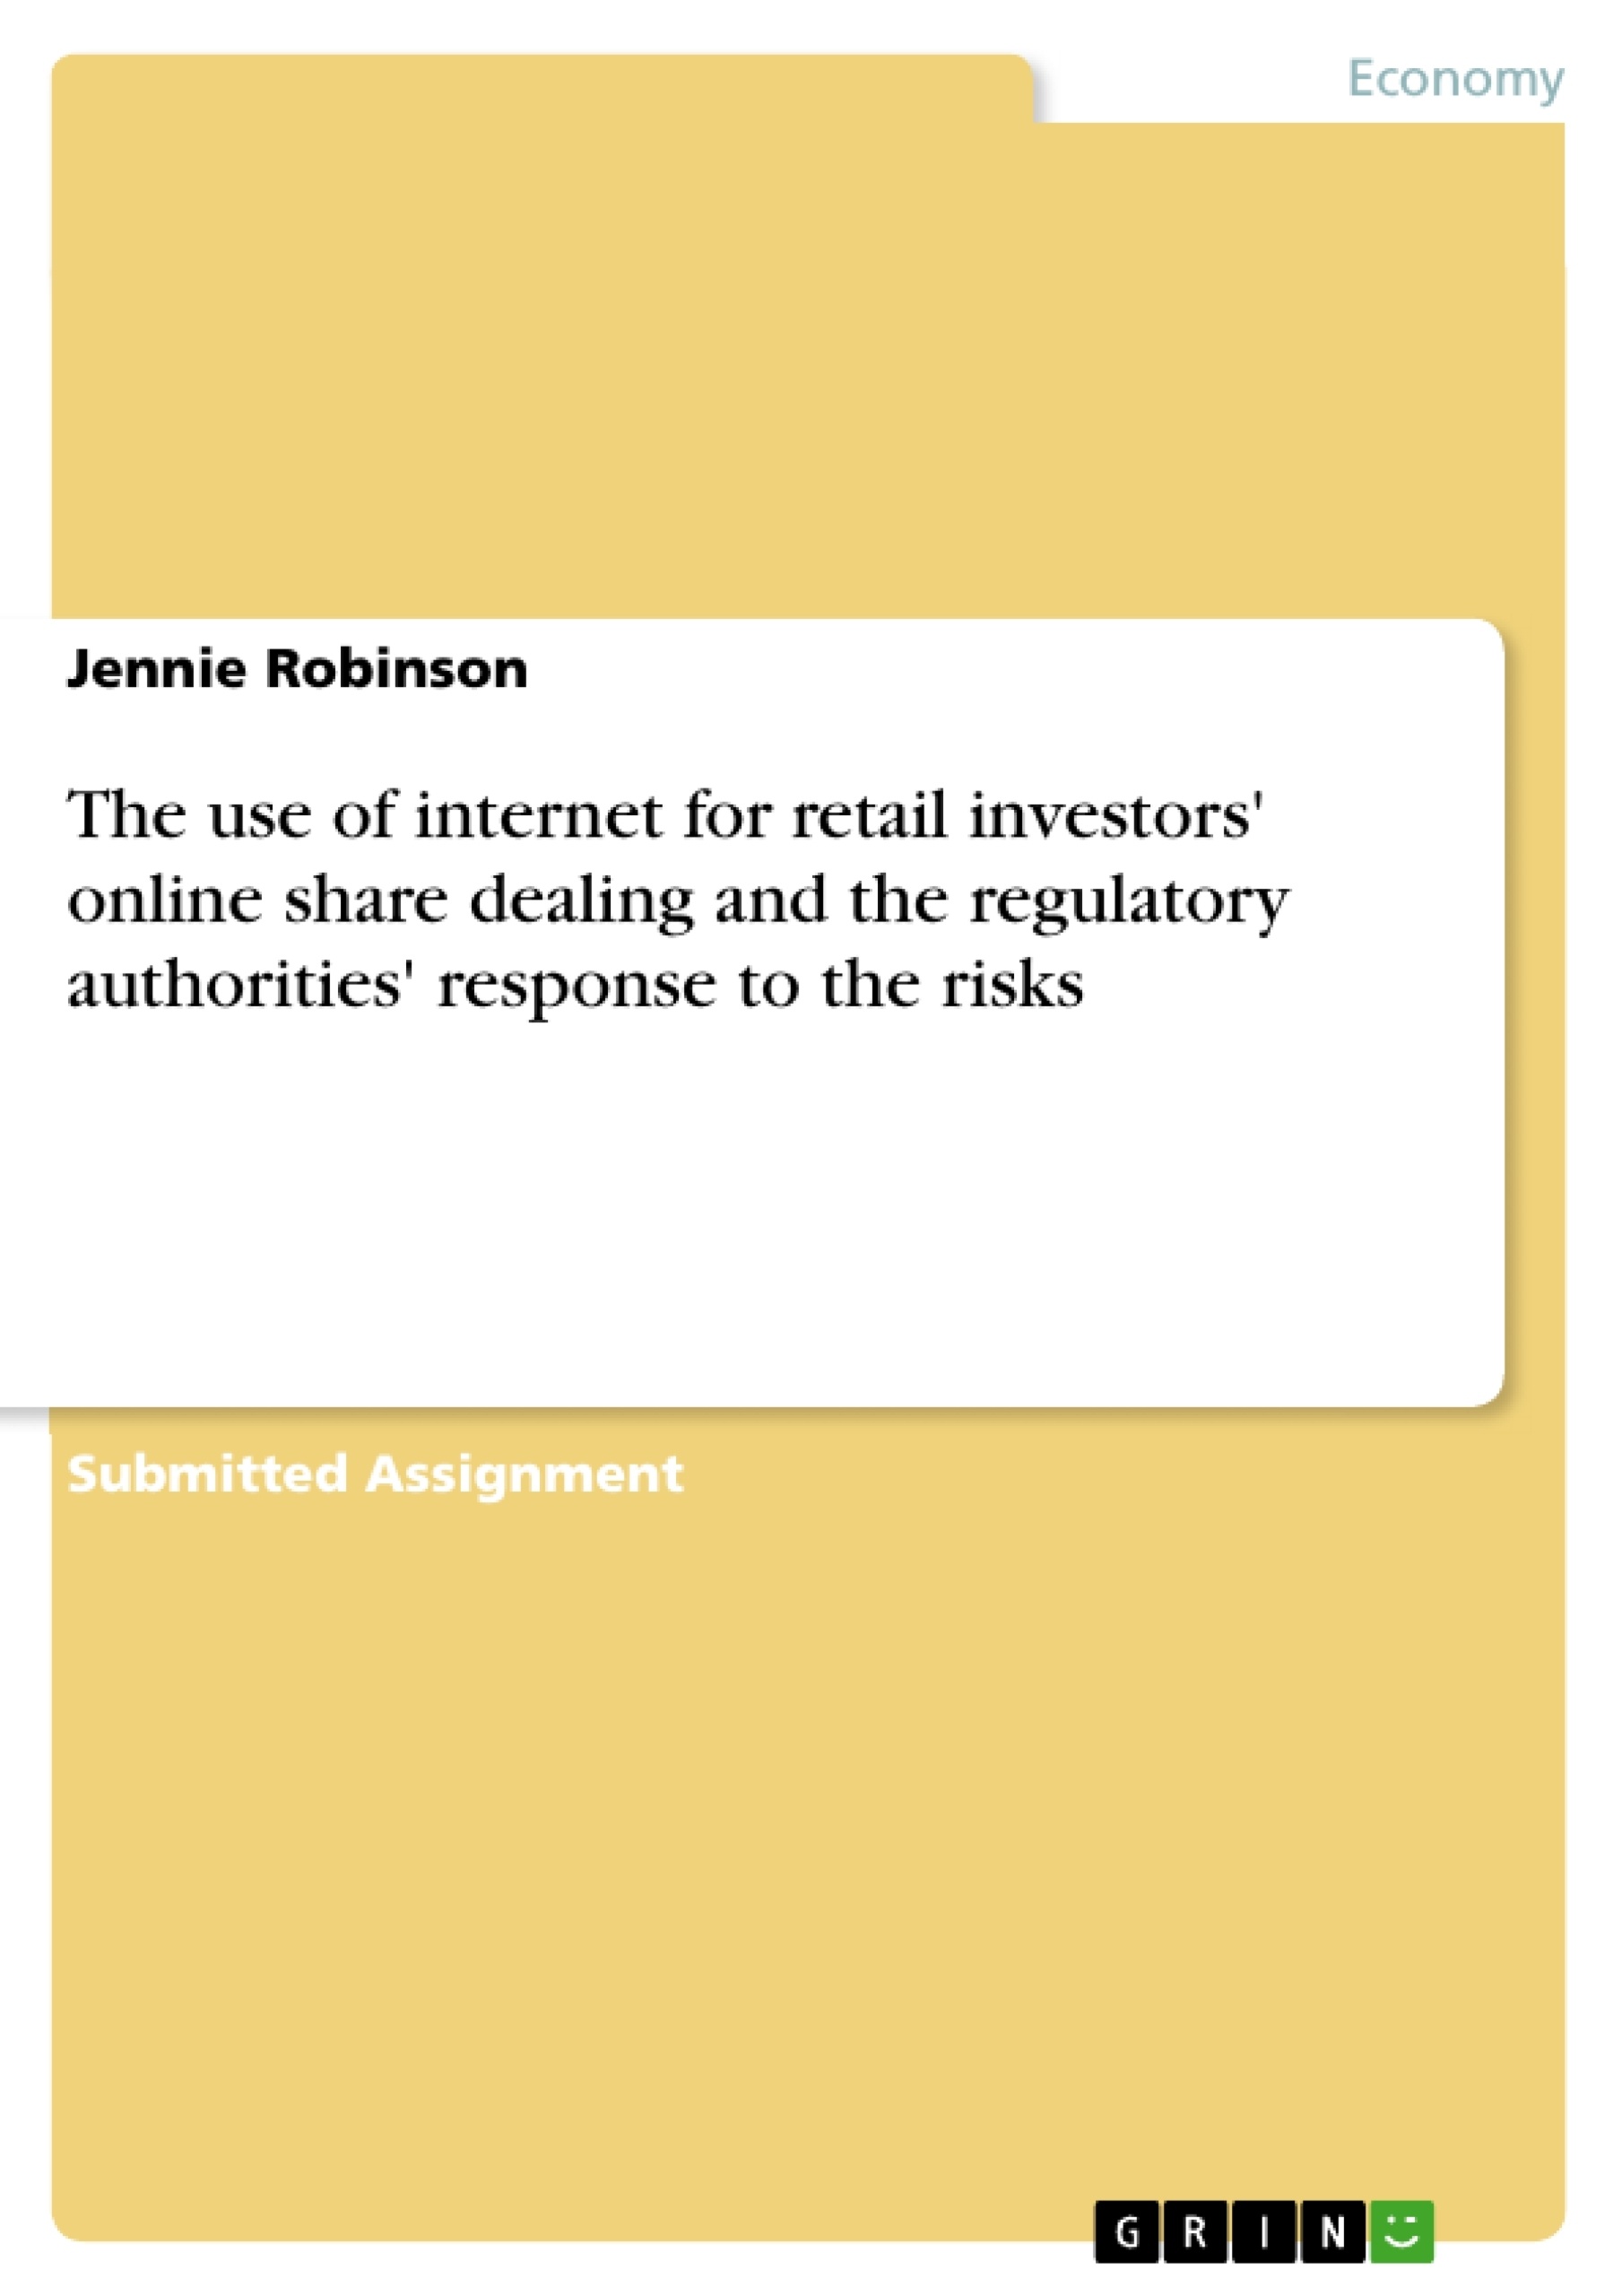 Titel: The use of internet for retail investors' online share dealing and the regulatory authorities' response to the risks